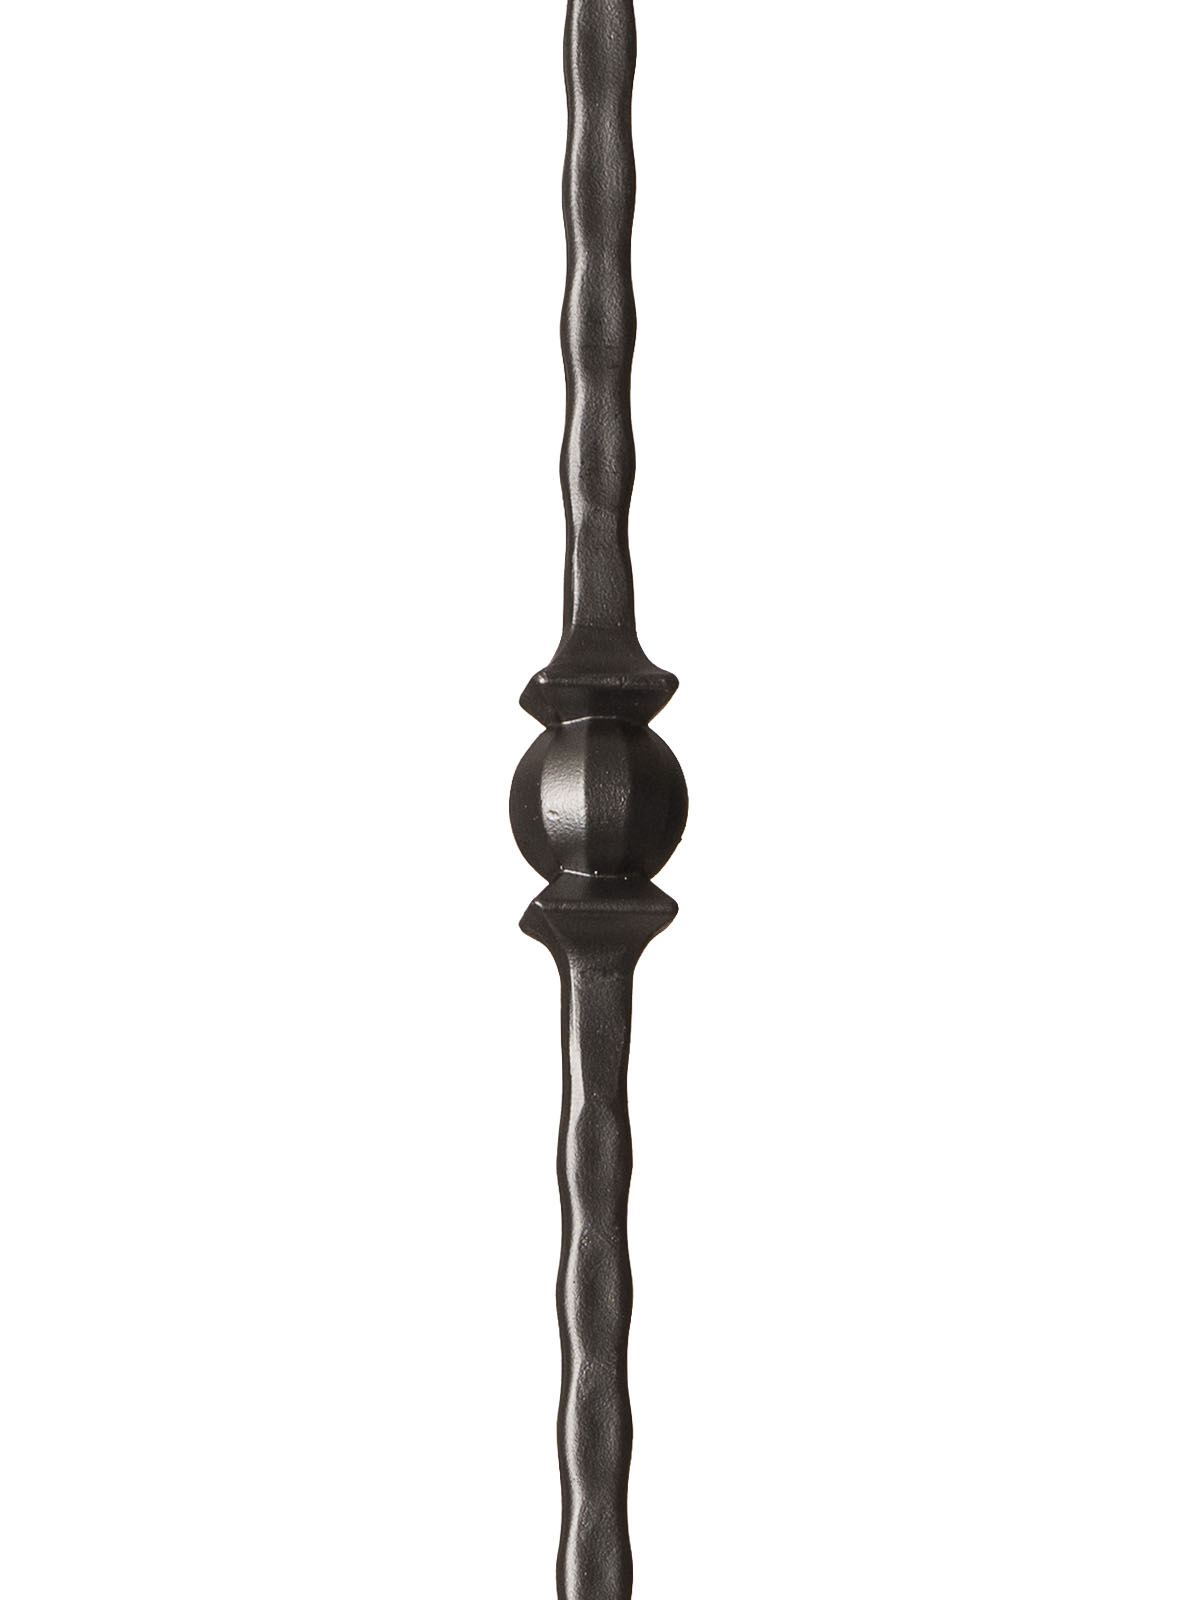 Iron Baluster 9033 - 9/16" Hammered Face - Double Ball